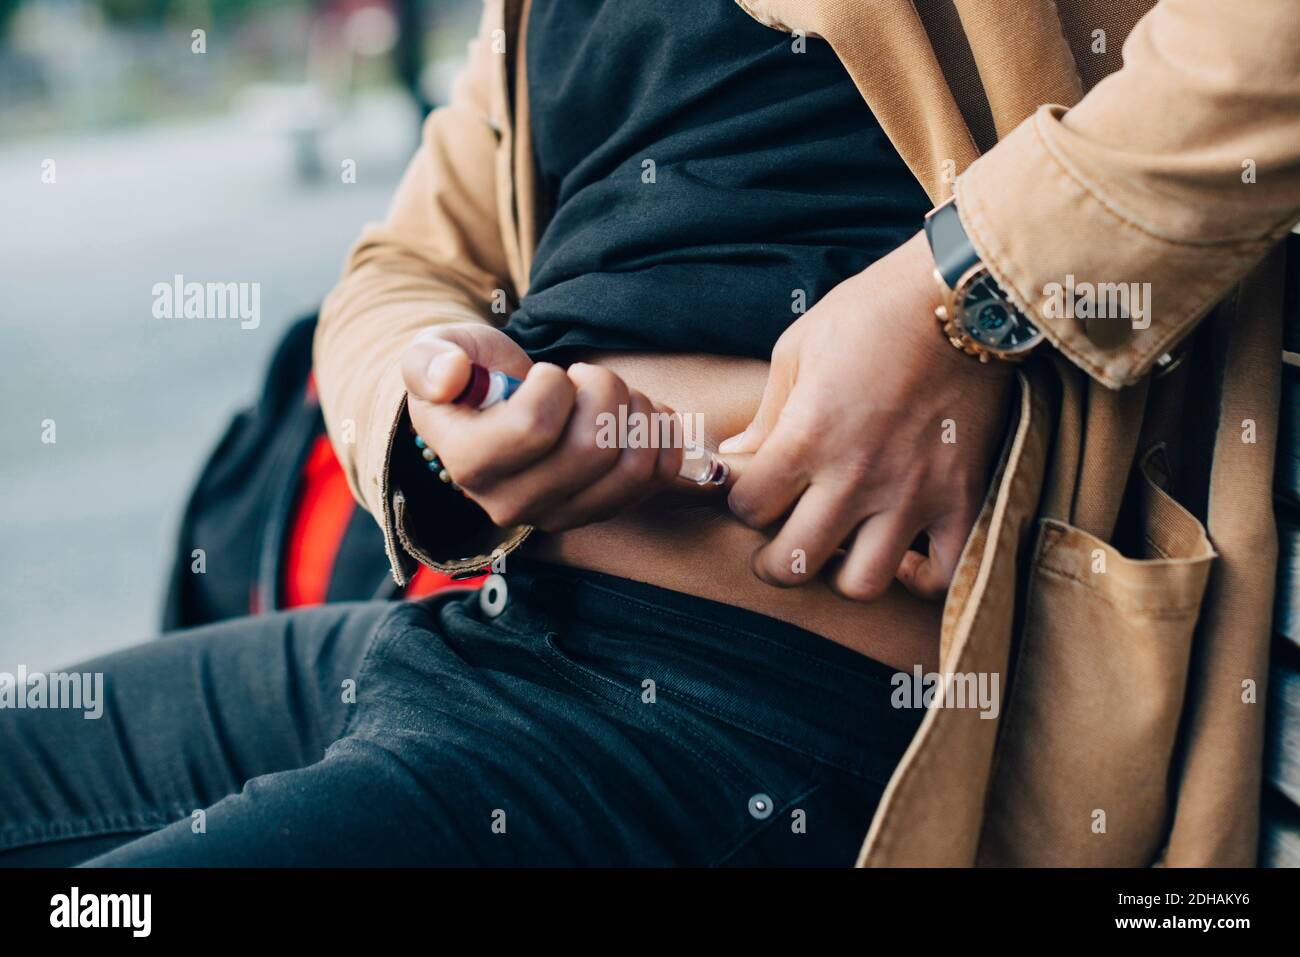 Midsection of man injecting insulin while sitting on bench Stock Photo